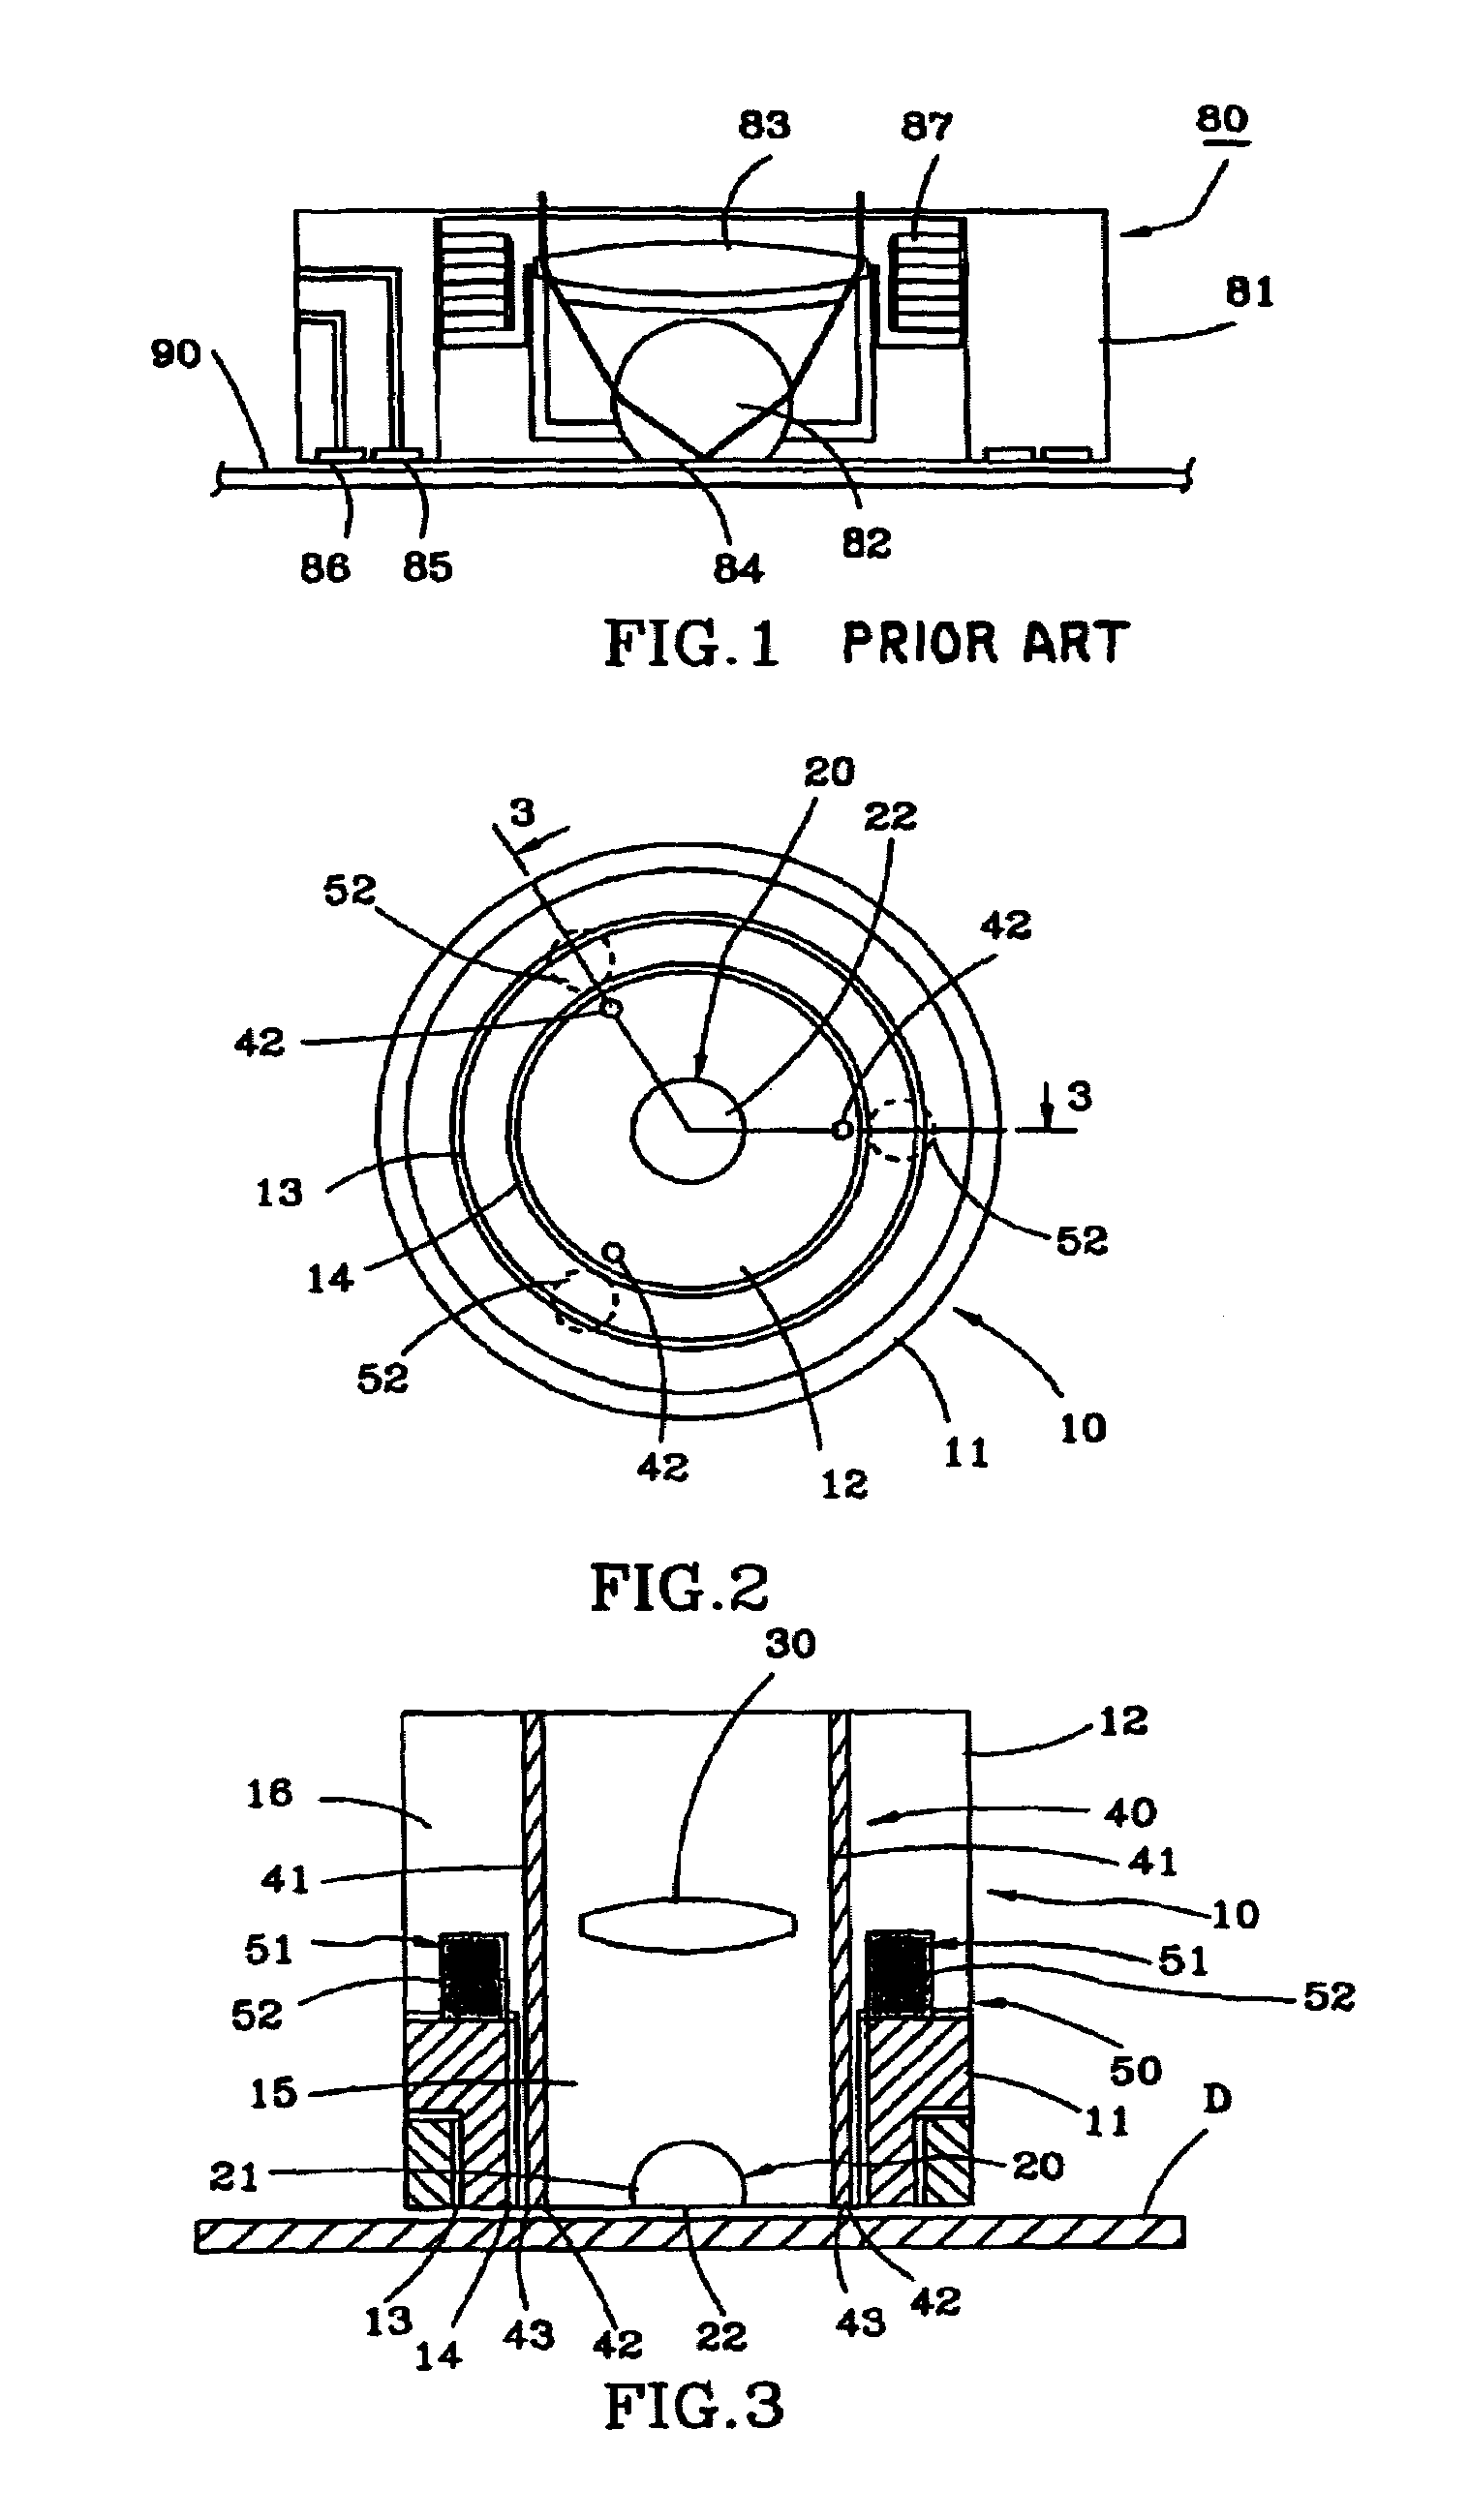 SIL near-field flying head structure to control gap between disc and SIL with three sensor points in front of lens holder